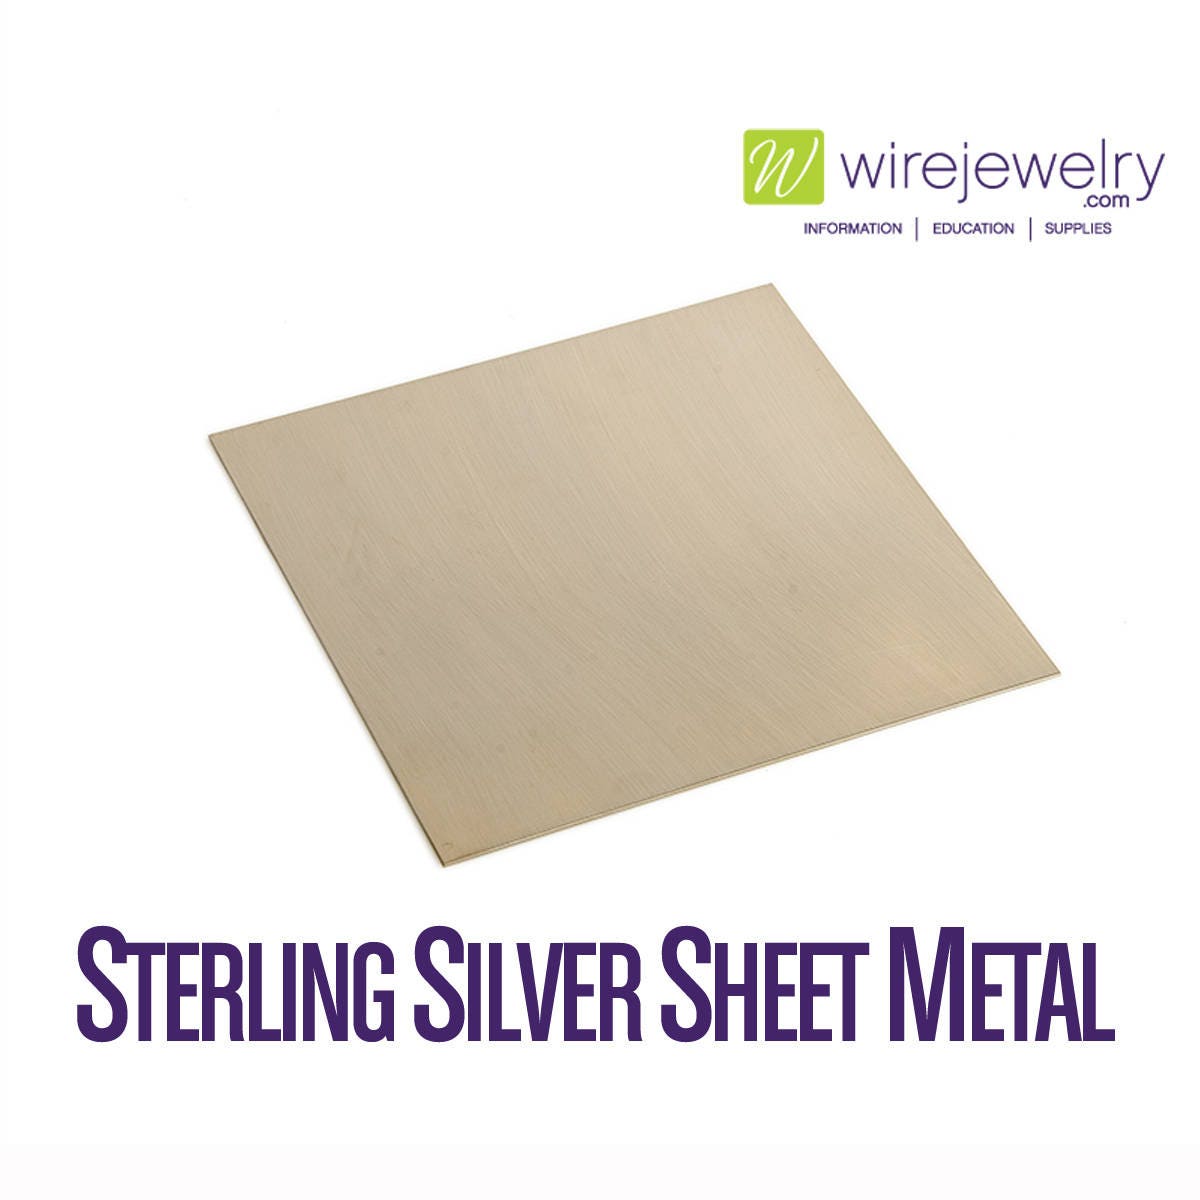 Sterling Silver SHEET METAL Cut to Order Jewelry Making Supplies by Chain0  